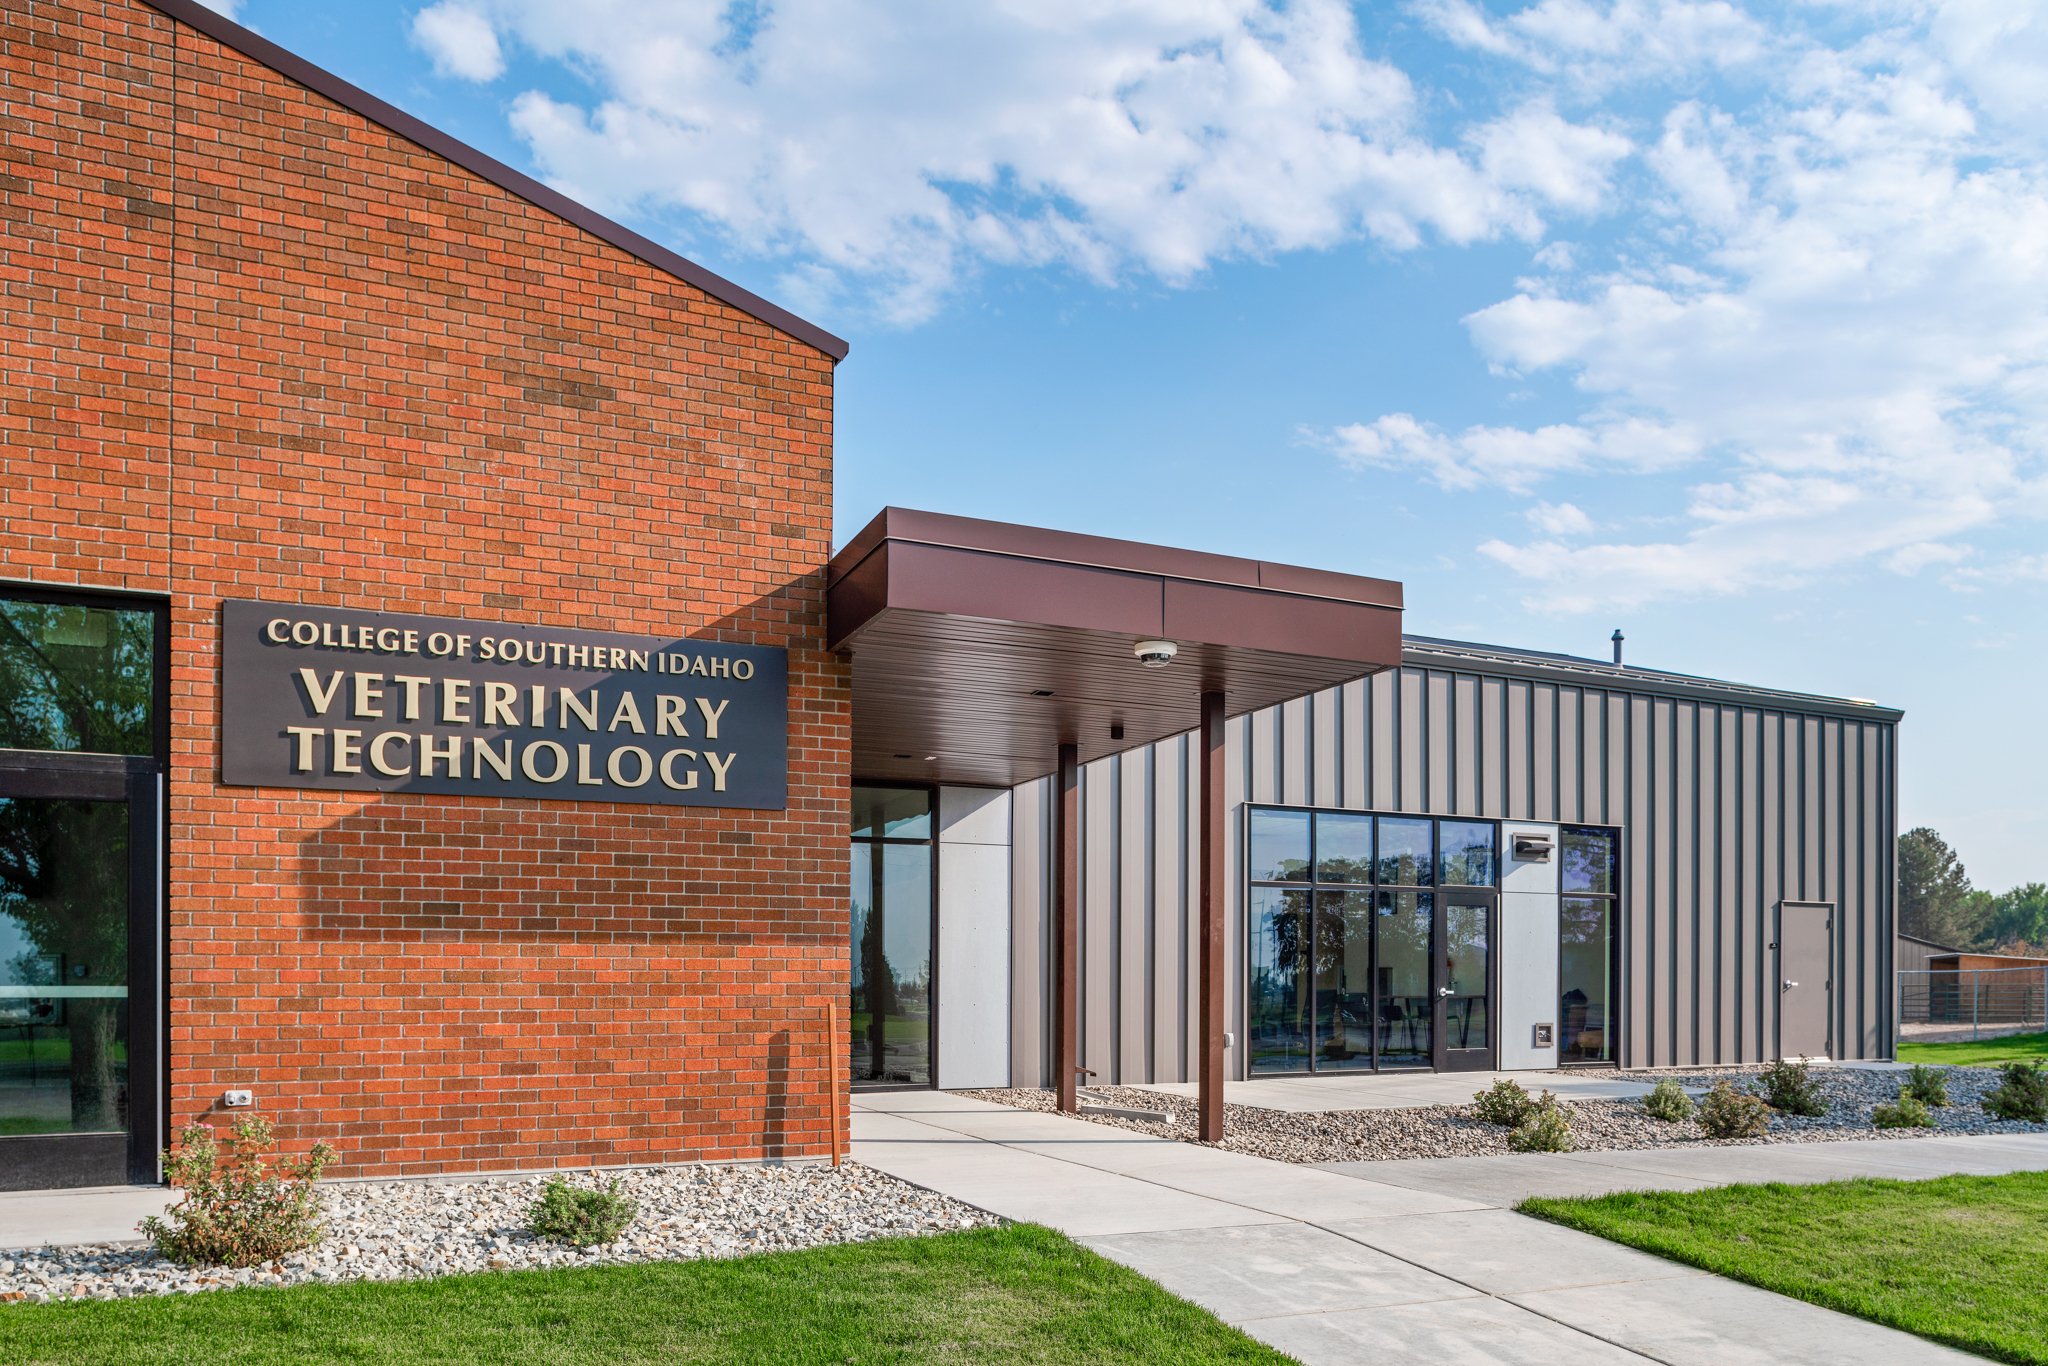 College of Southern Idaho Veterinary Technology